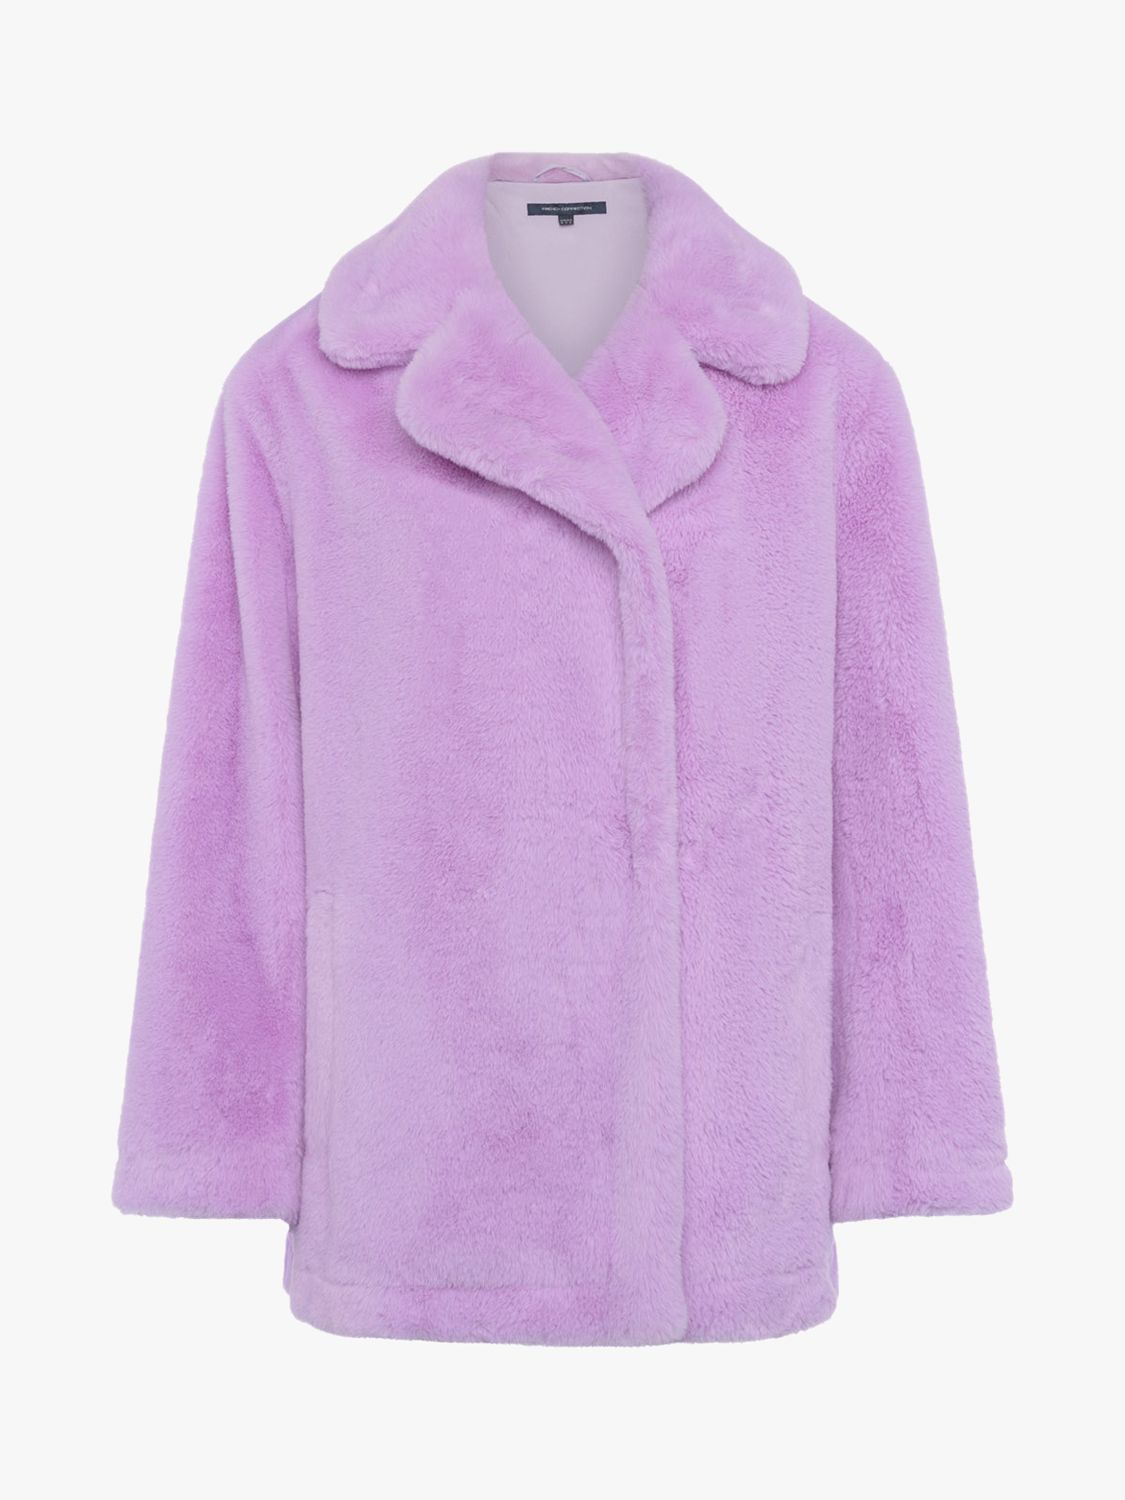 French Connection Buona Short Teddy Coat, Violet Tulle at John Lewis ...